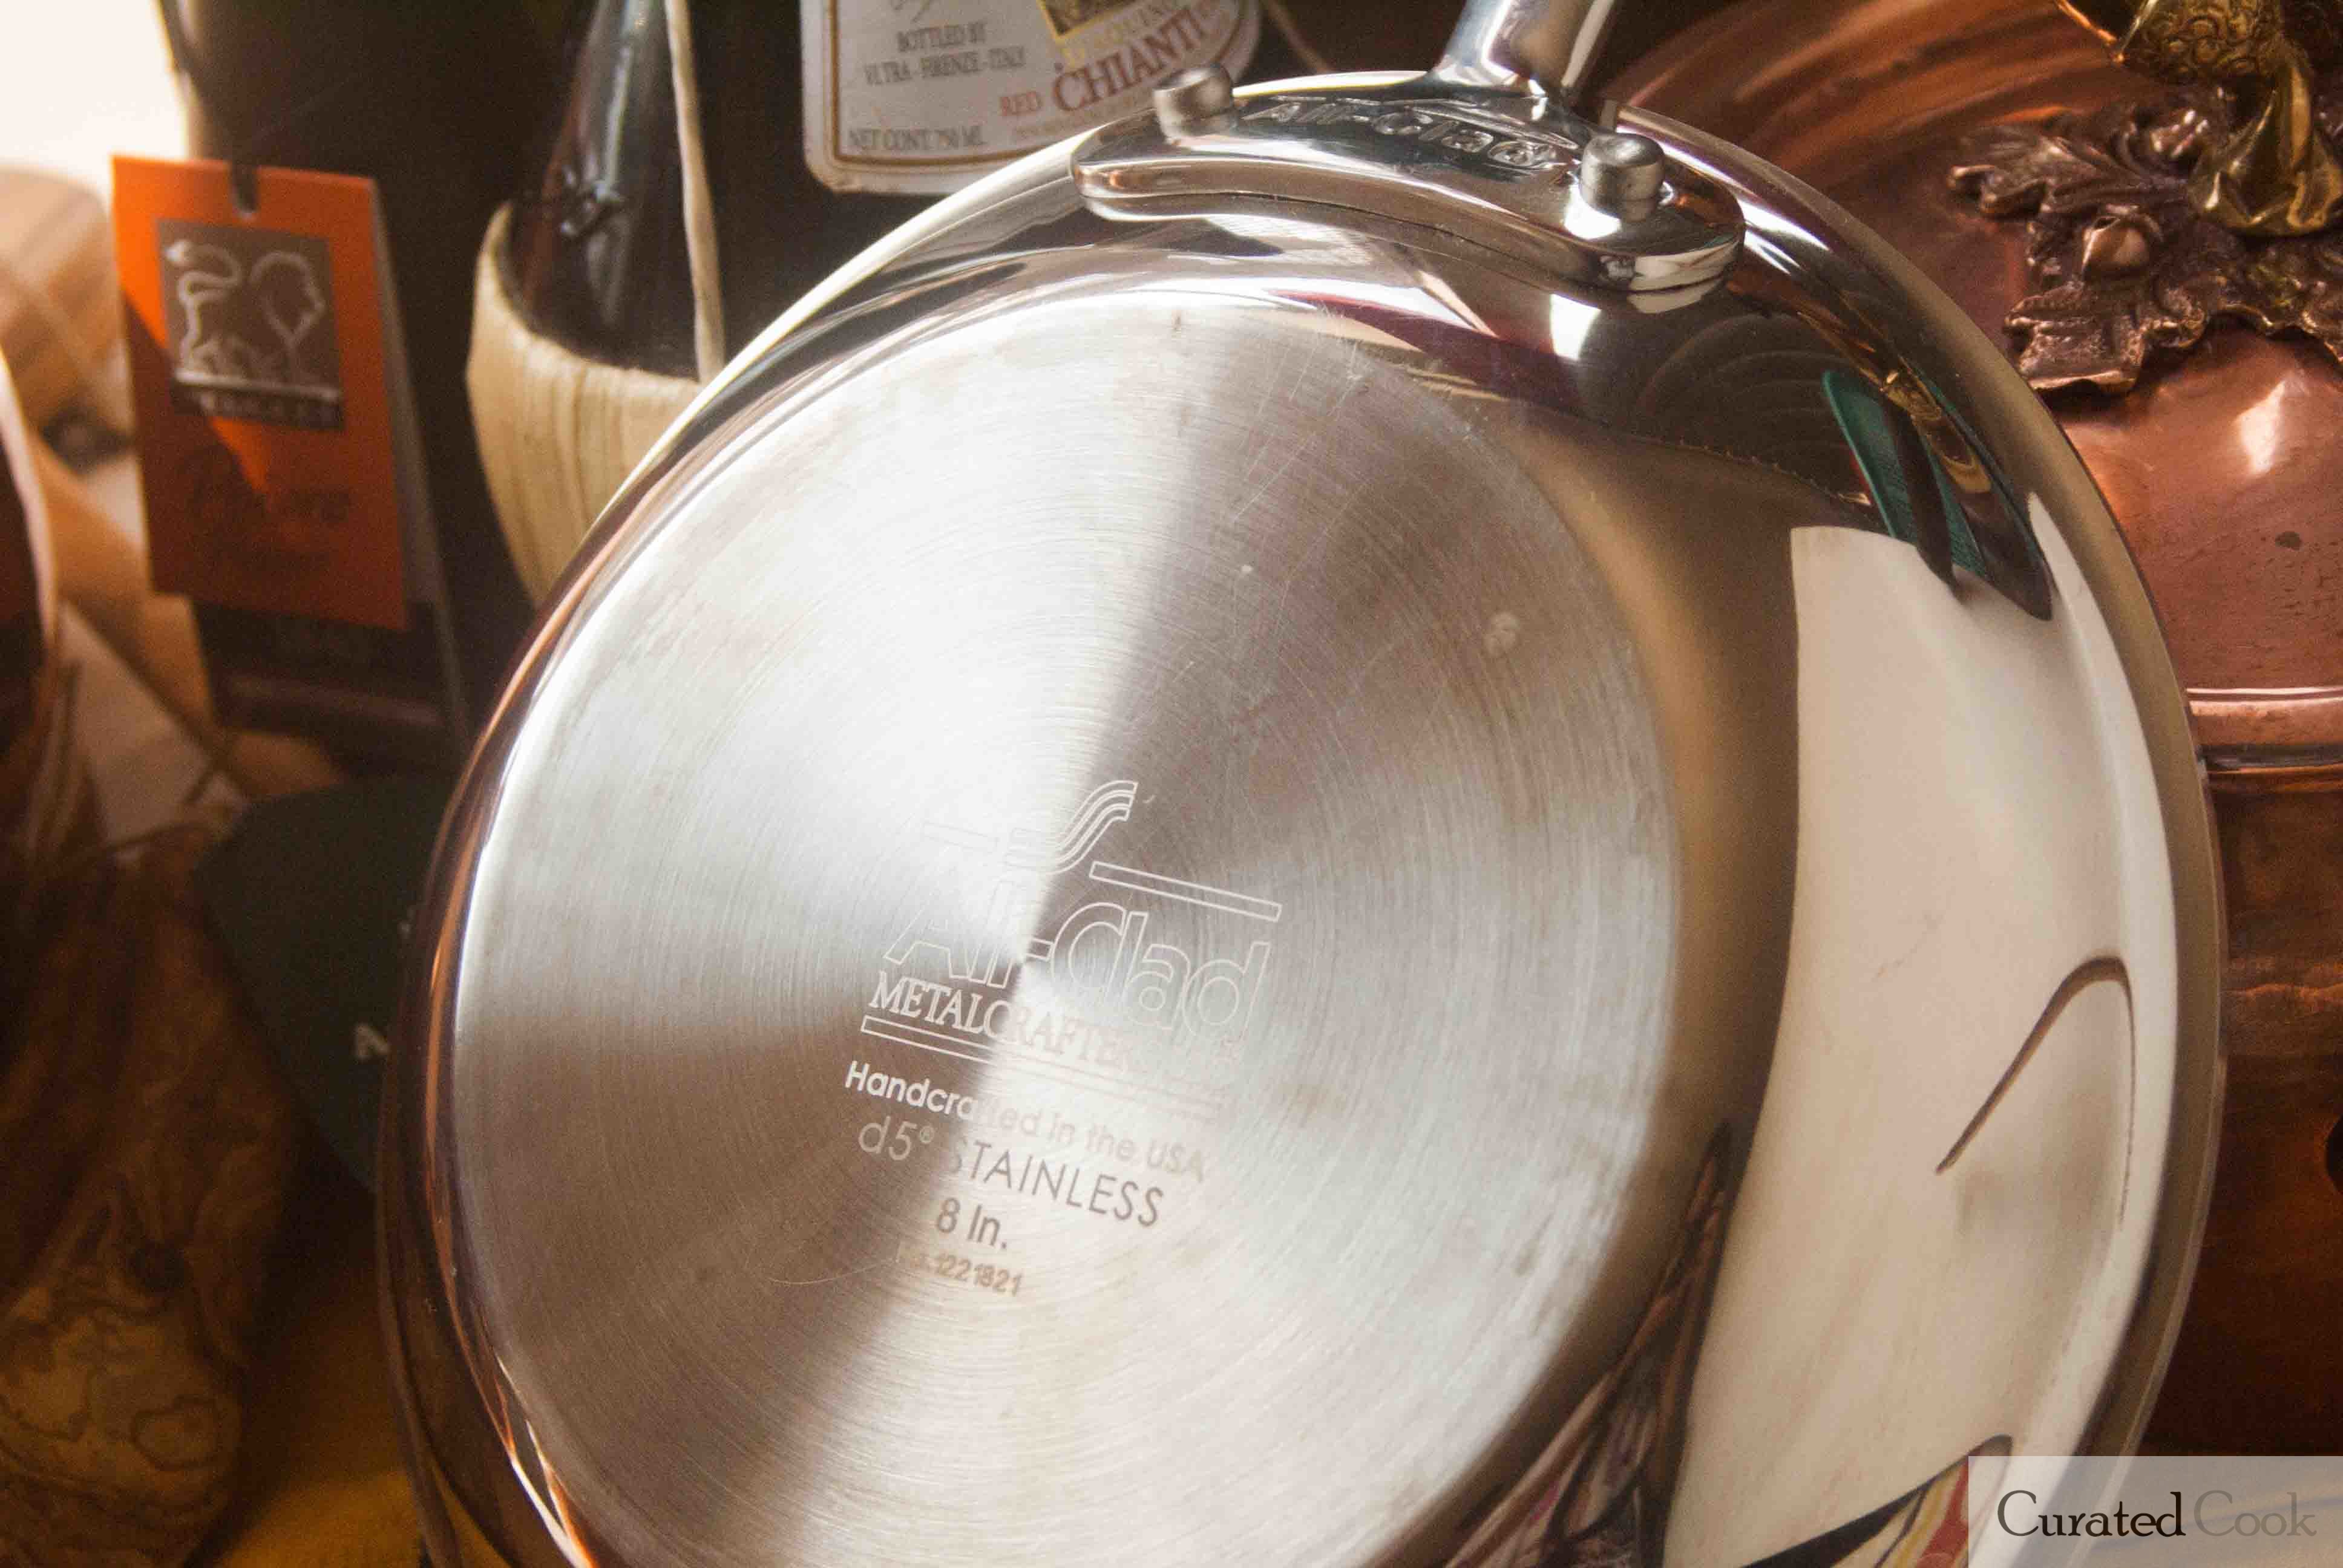 All-Clad All-Clad Stainless Steel 8 inch Fry Pan Skillet 